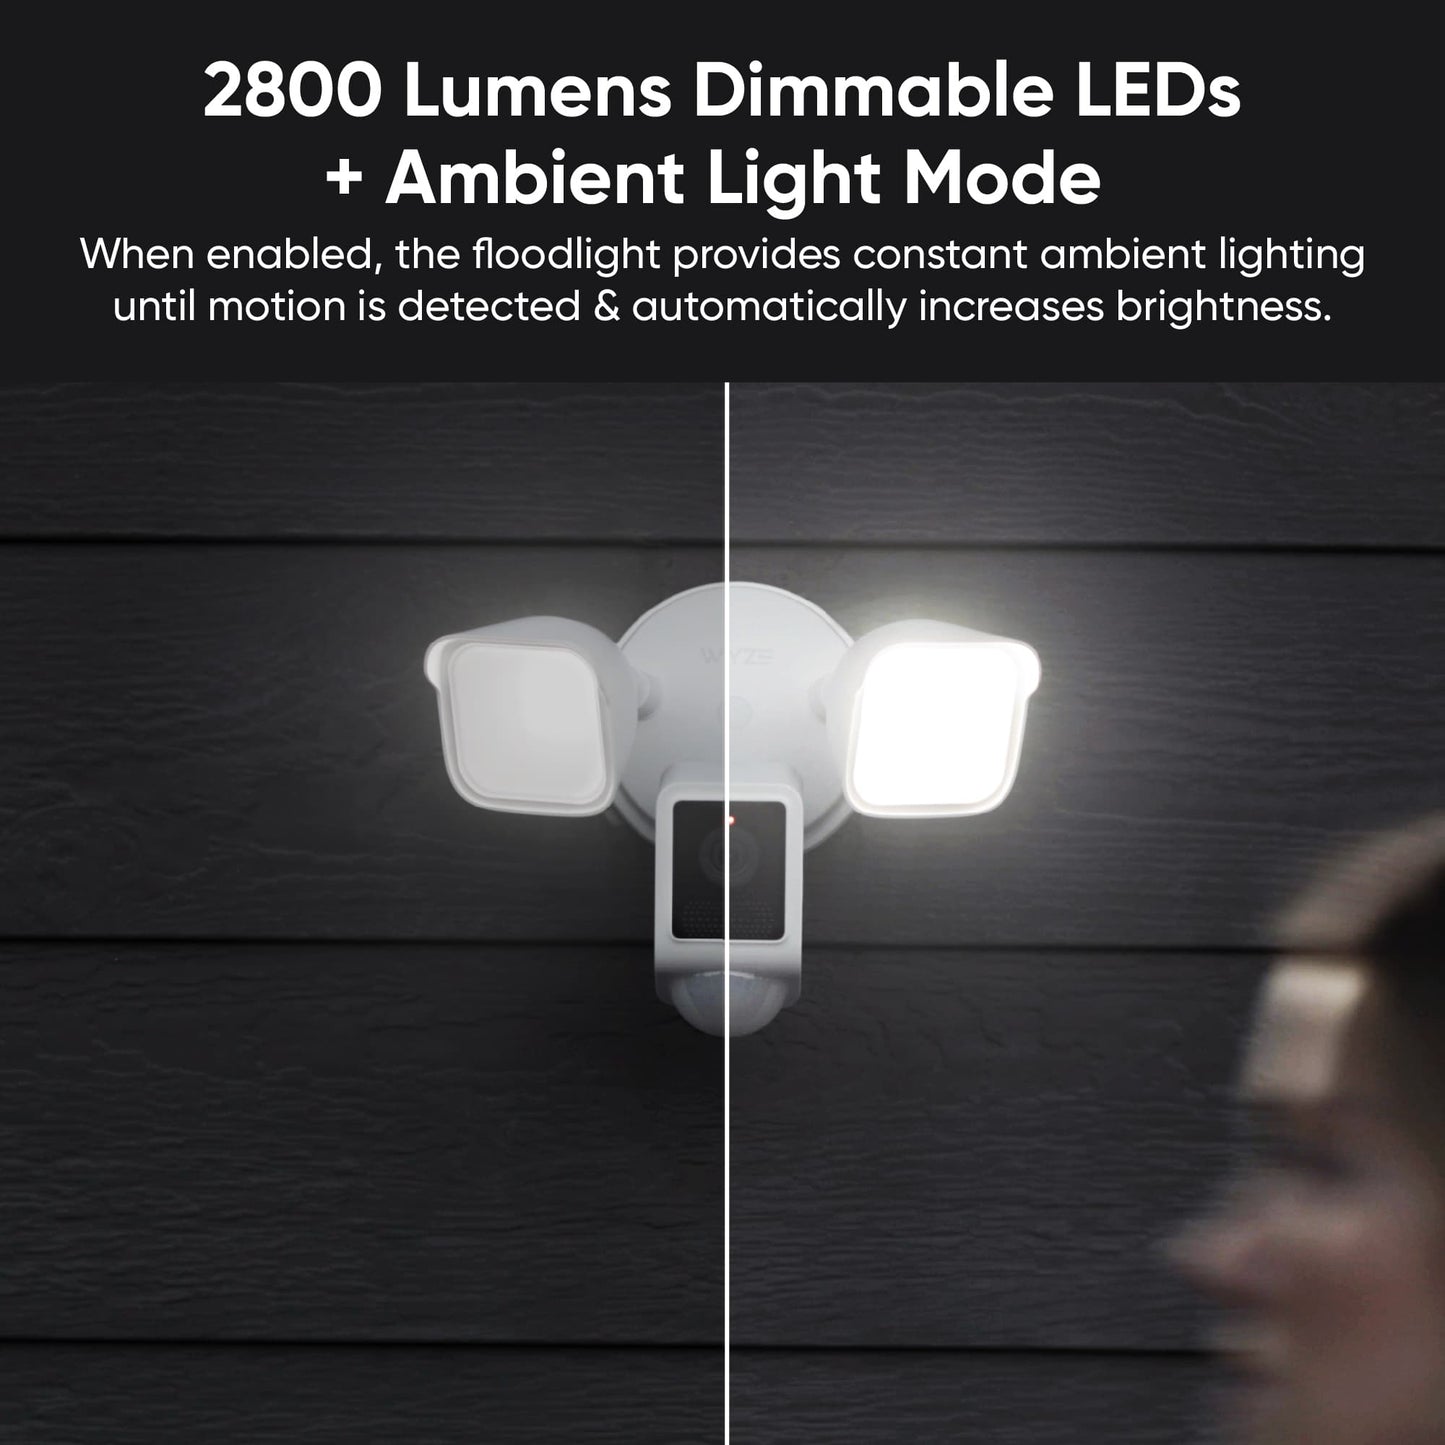 Comparison image of 2800 lumens dimmable LED light panels